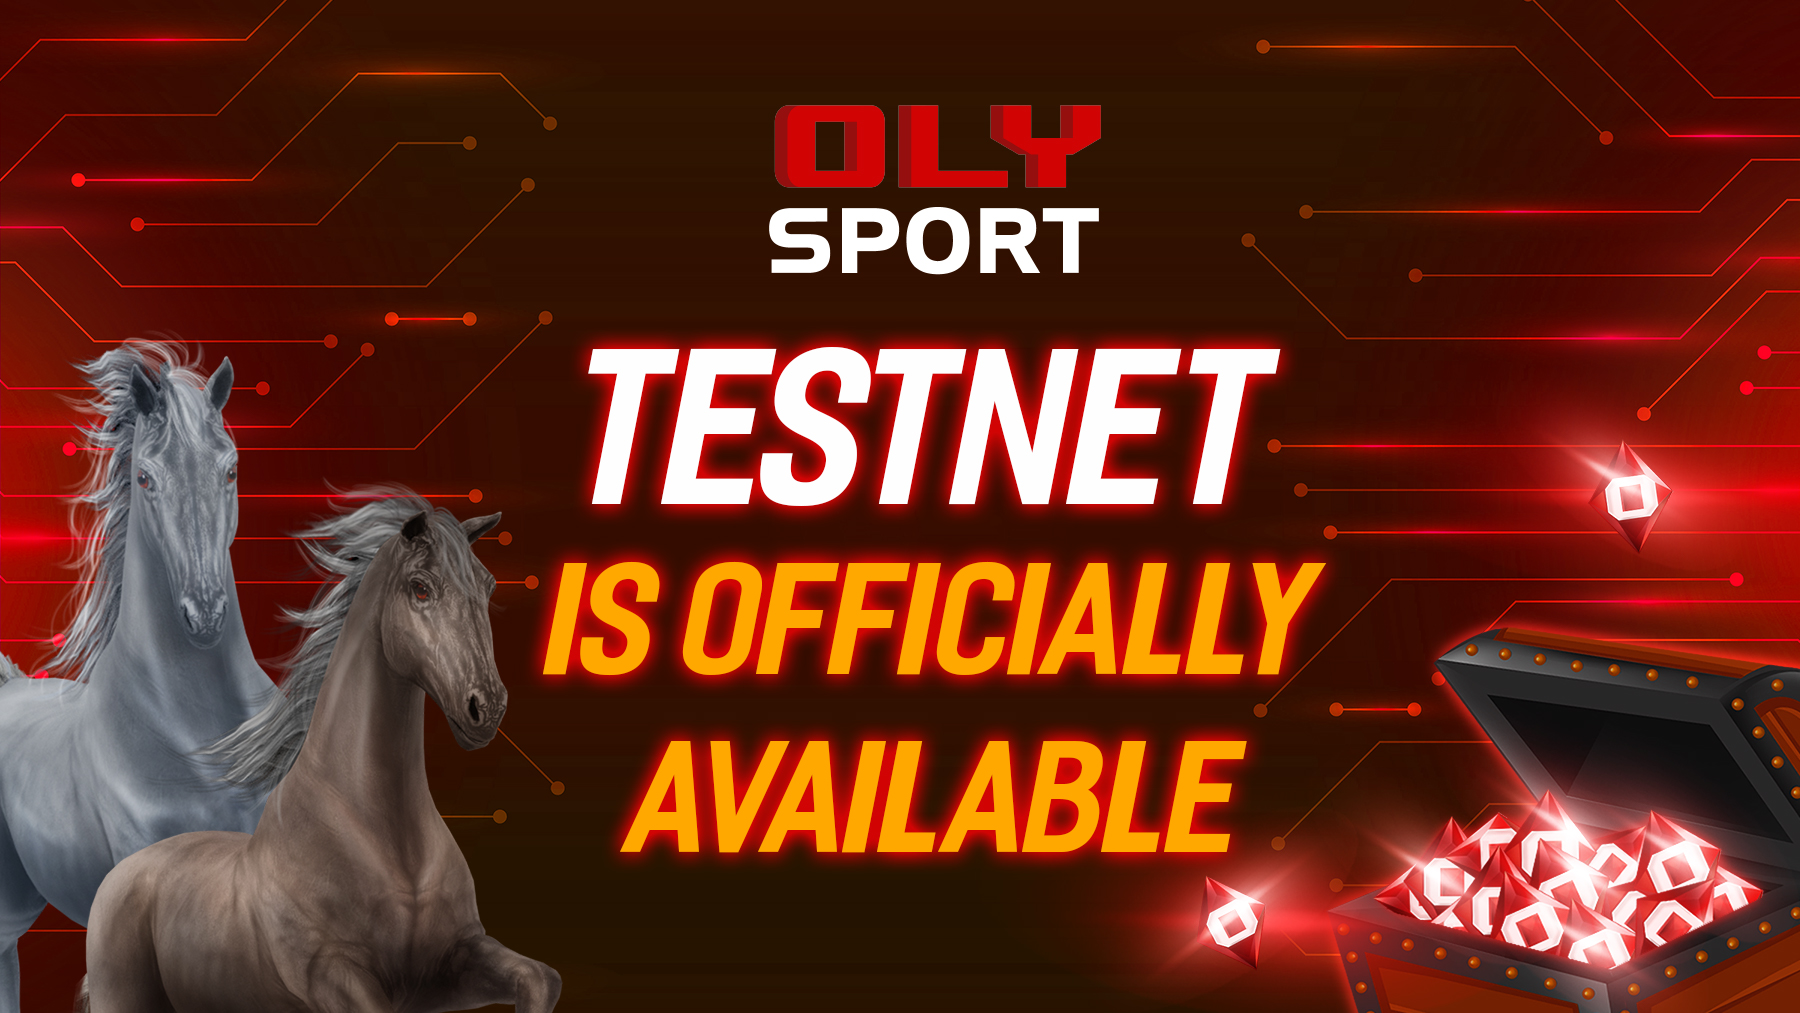 Breaking news: Oly Sport opens Testnet to give away VR glasses and NFT horses to the best riders